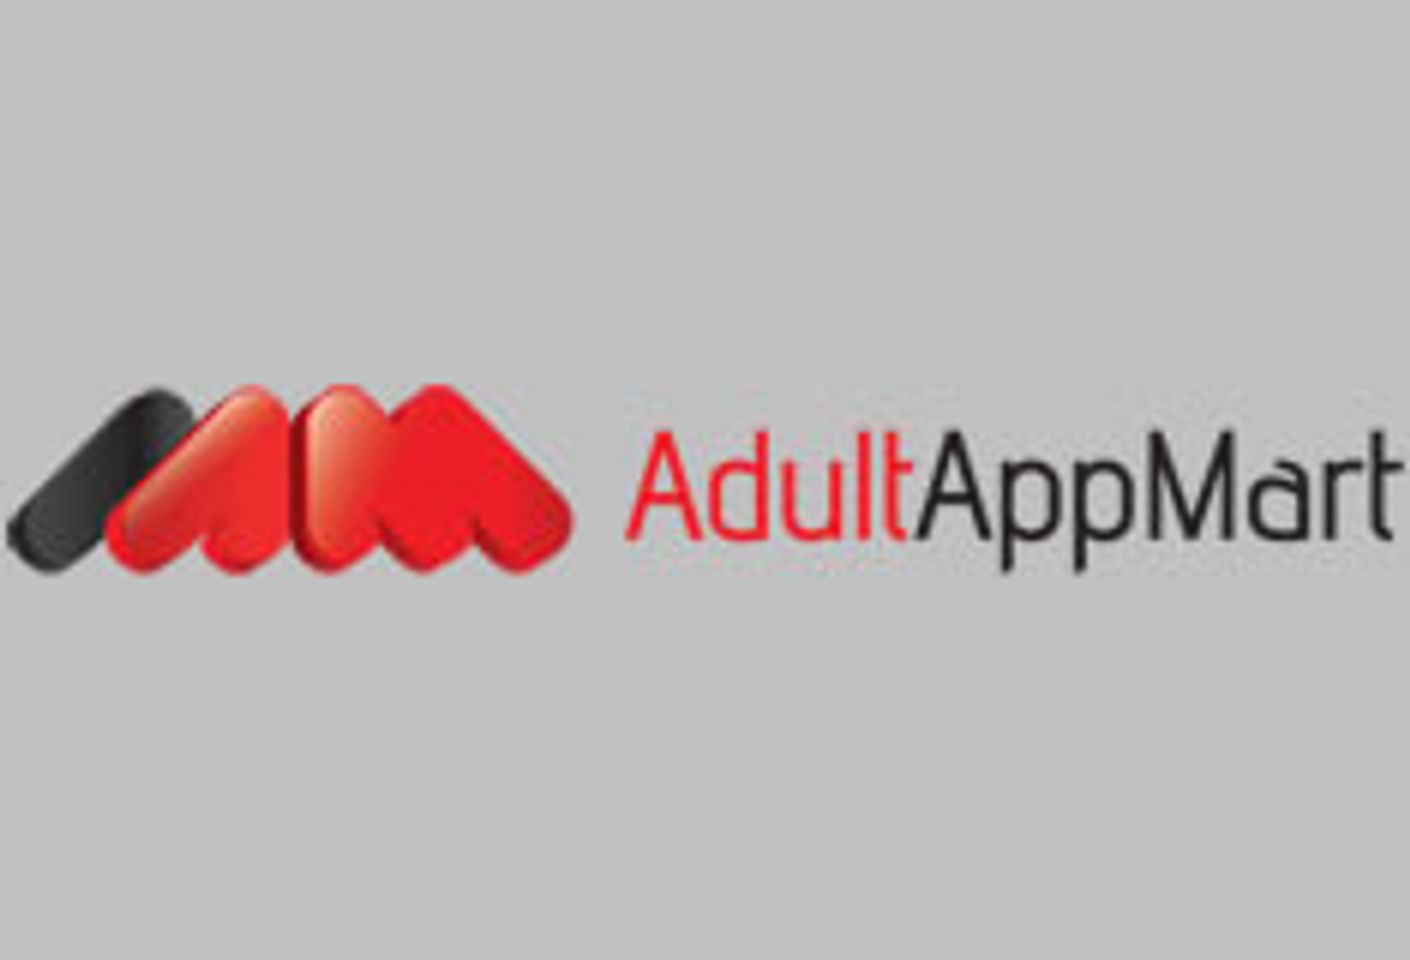 AdultAppMart Finalist for the Mobile Entertainment Awards 2012